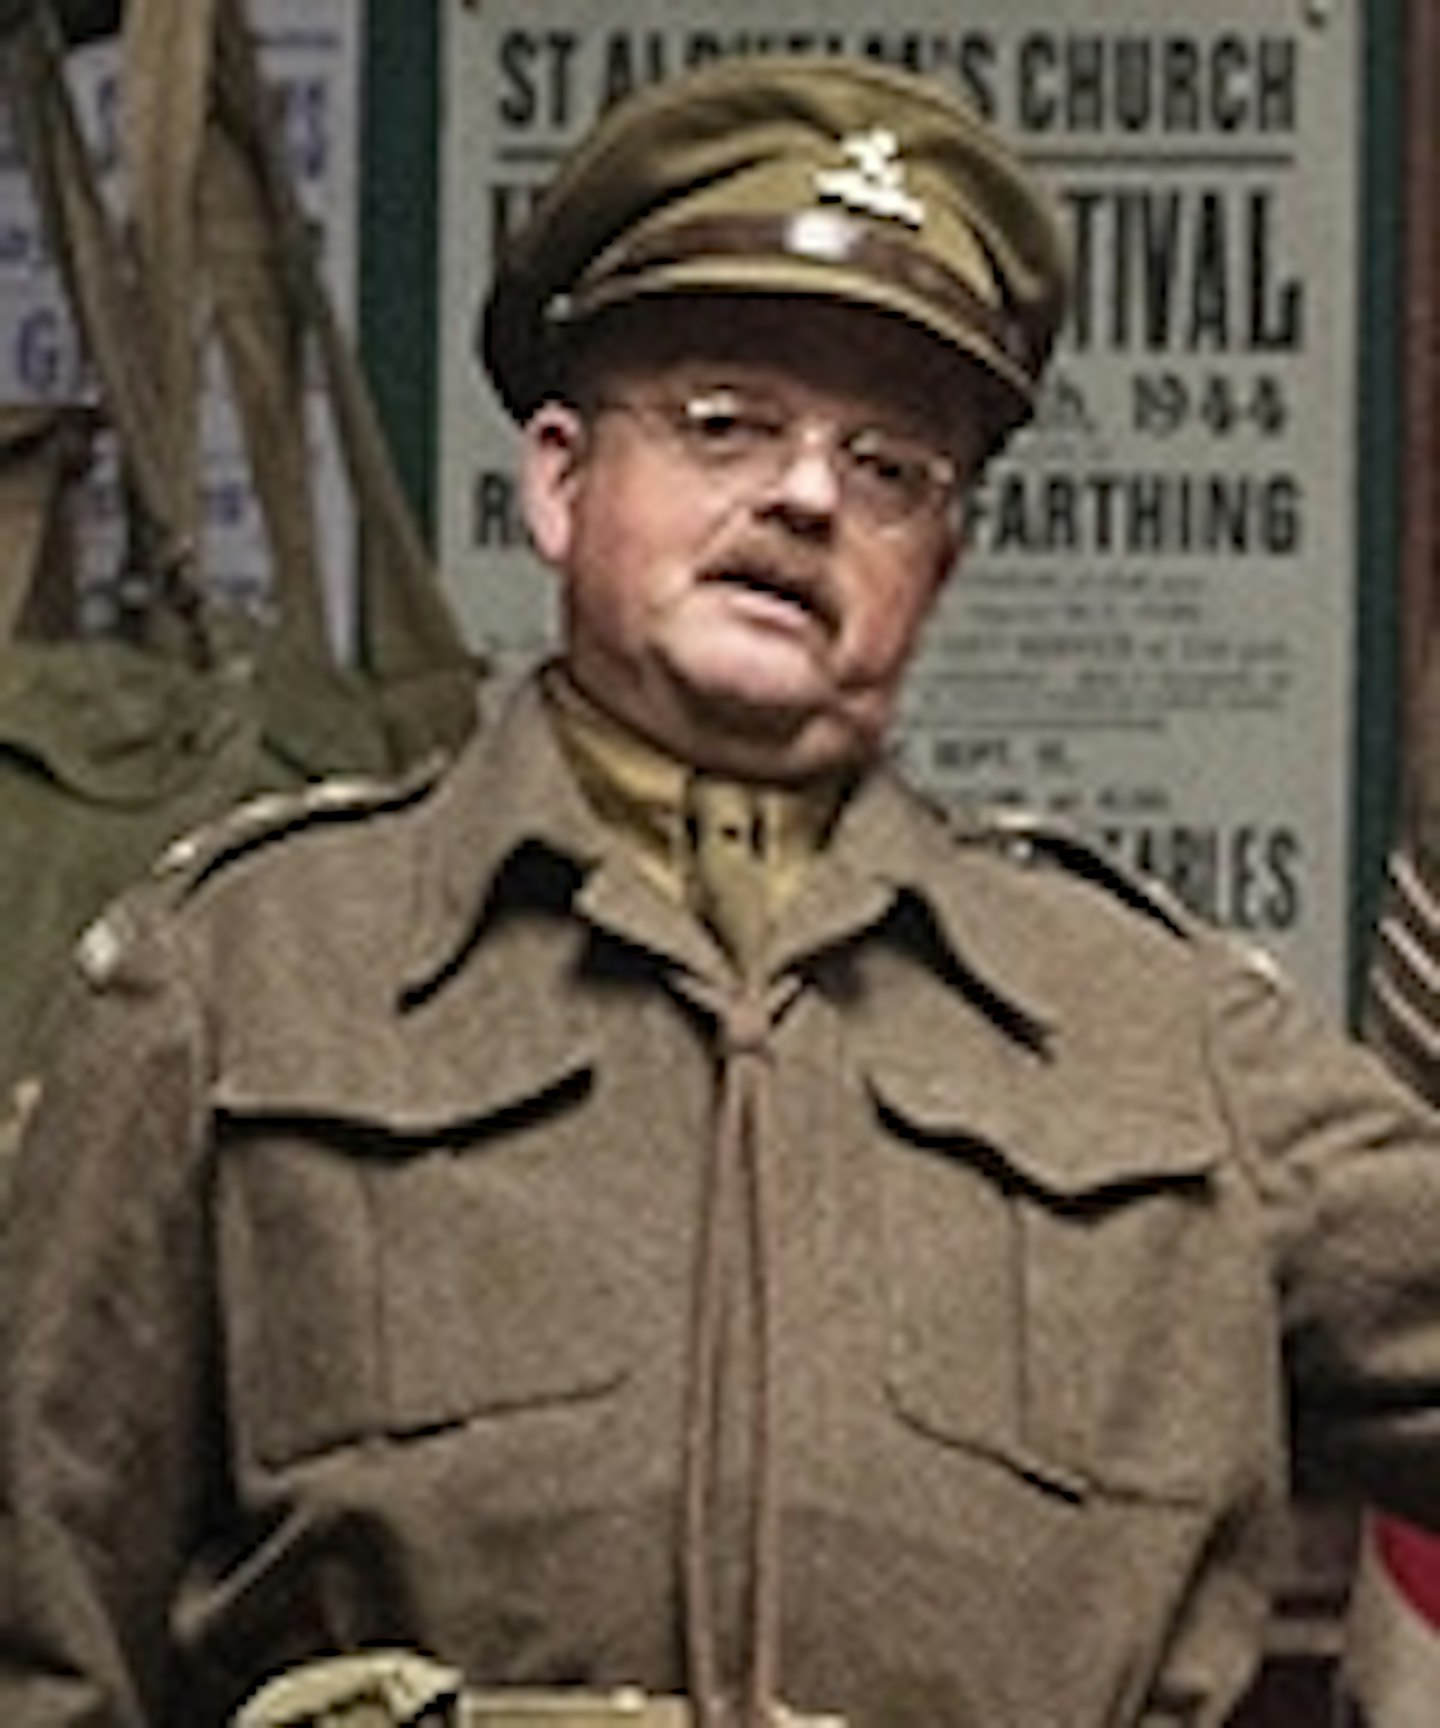 Attention! New Dad's Army Image Online